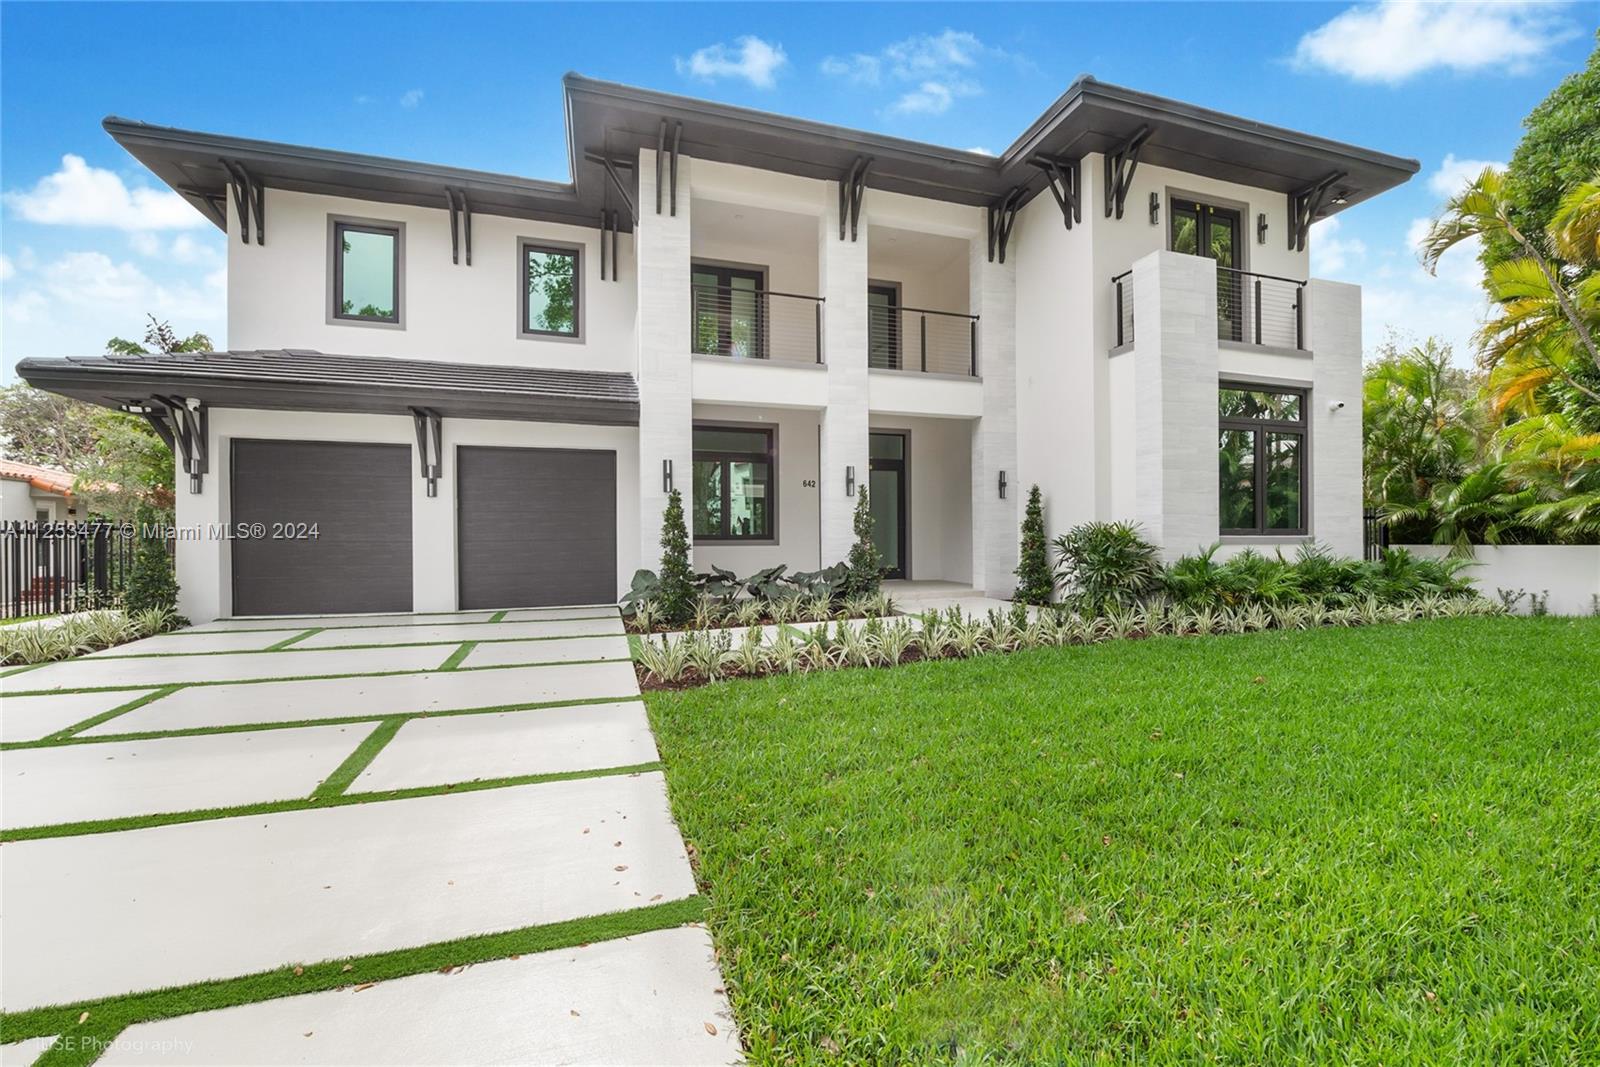 Brand new transitional-style executive home within walking distance from Granada Golf Course, Miracle Mile and Downtown Coral Gables. House is on a double lot and features 5 bedrooms, including one on the ground floor, 6 bathrooms, 2 car garage, ample yard and pool. Oversized main walk-in and jacuzzi. Top of the line European kitchen cabinets and appliances including Wolf oven, speed oven, and electric range. A laundry room on each floor. Large format porcelain and wood floors. Prewired for entertainment and security system, floating staircase with architectural detailing and glass wine storage. Top of the line impact windows and doors with Solarban 70 High Performing Low E Glass. Connected to the sewer system and Municipal water. See attached floorplans/specs.